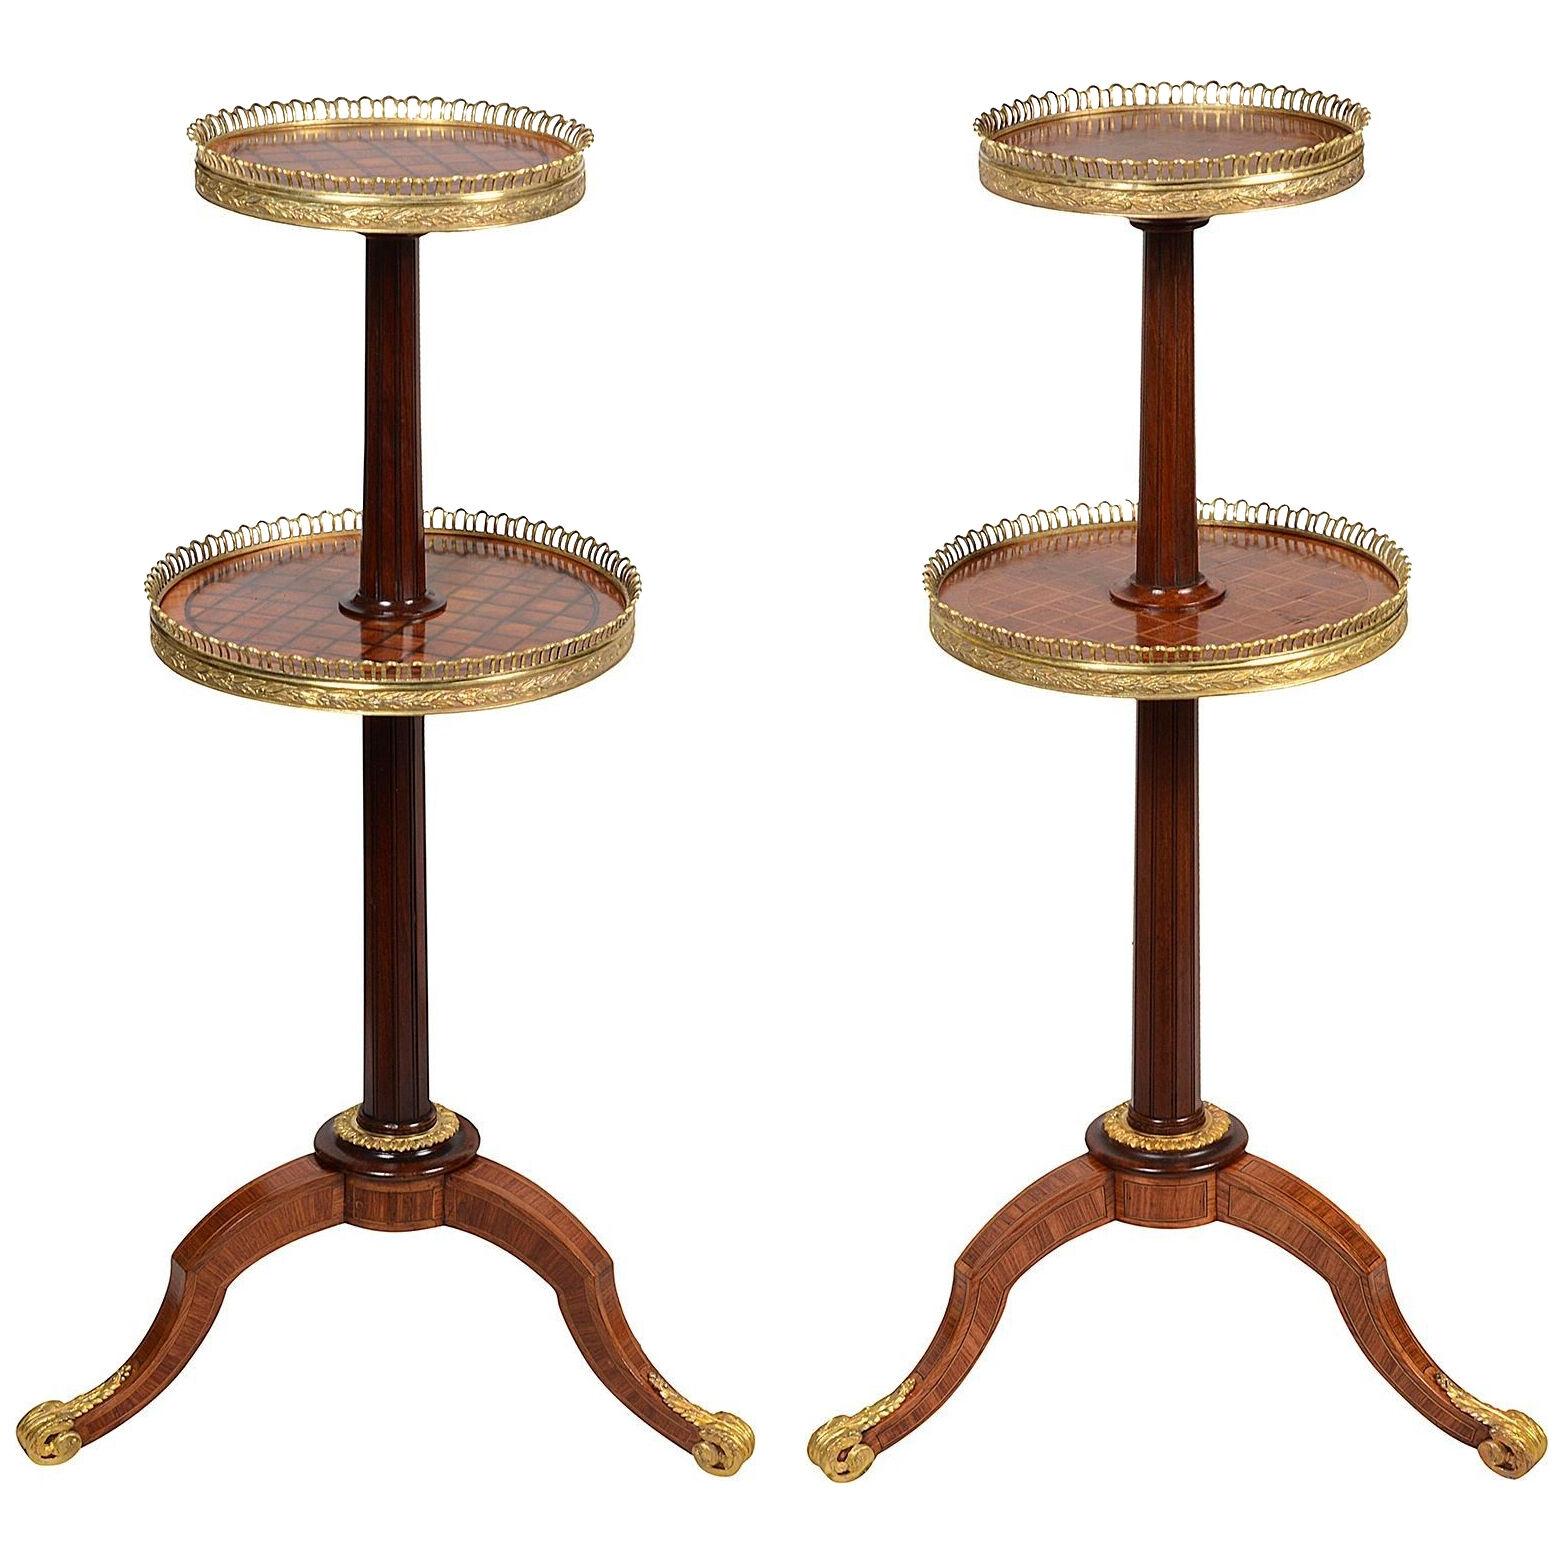 A fine quality pair of two tier etegeres, after Donald Ross, circa 1860.